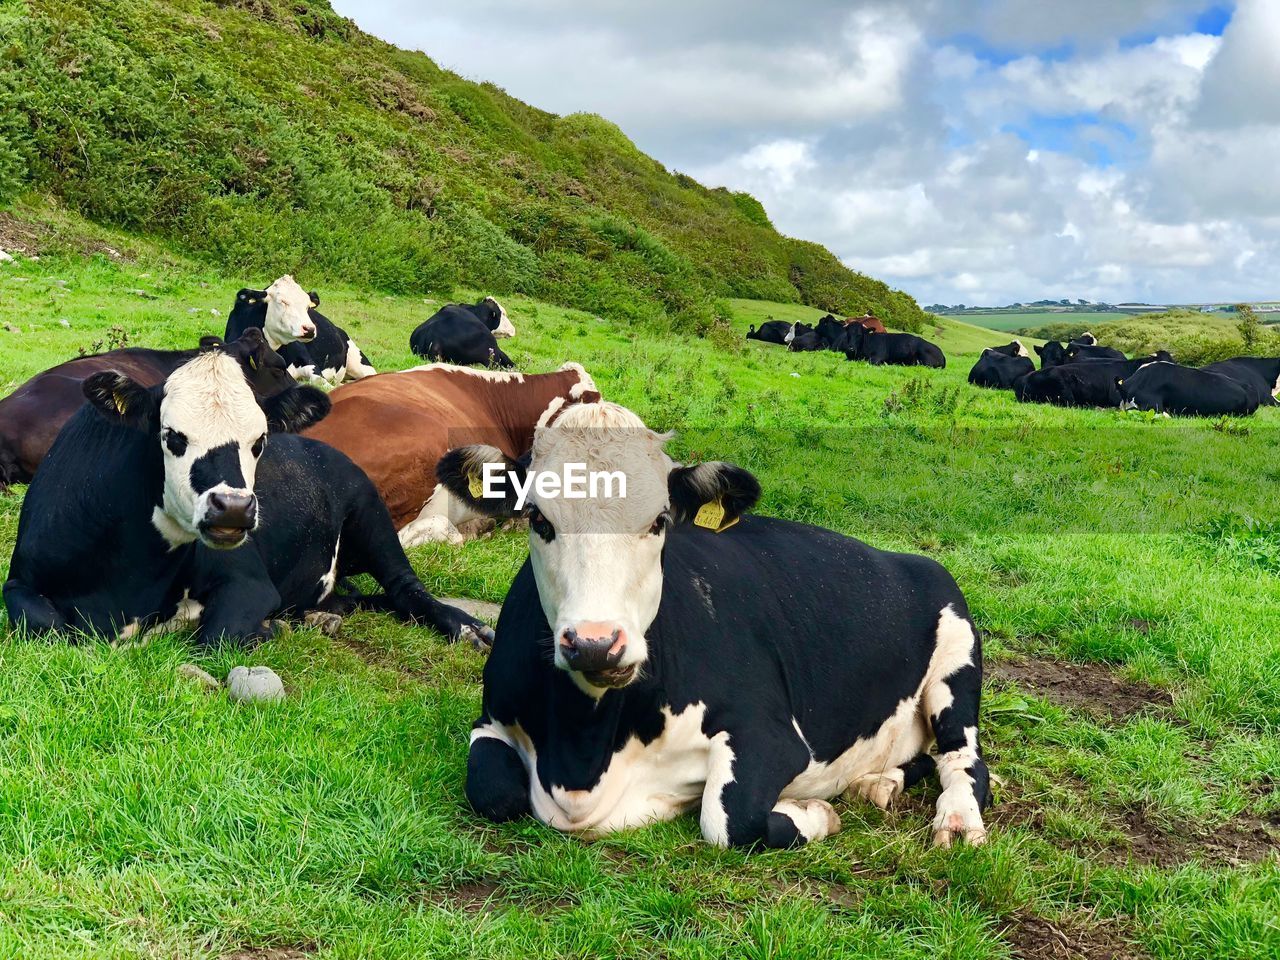 Cows sitting on land